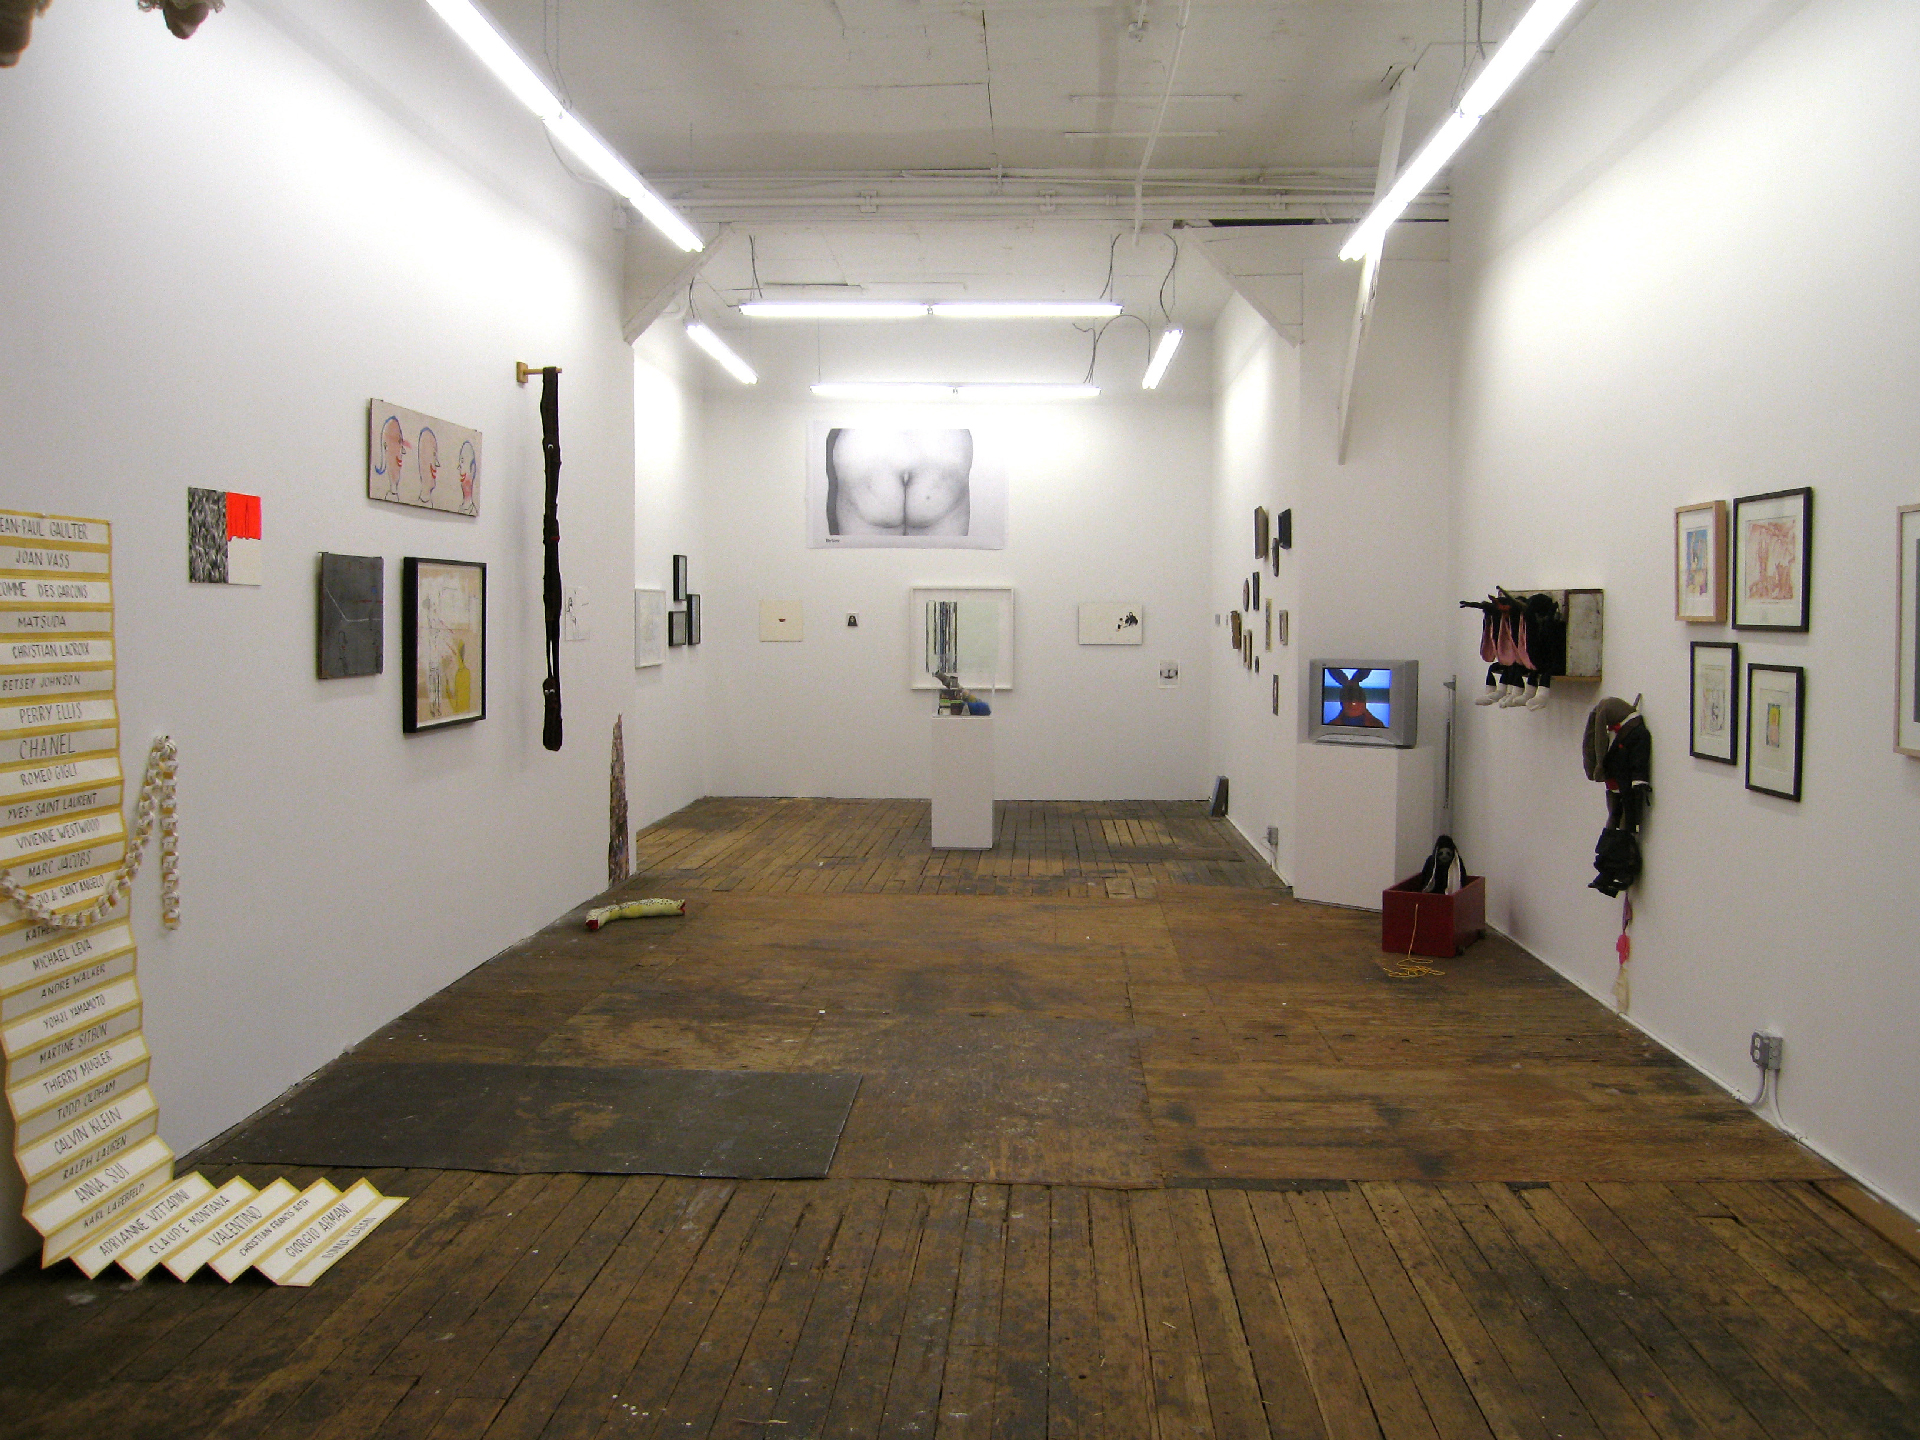 Wood floored gallery with eclectic mix of wall work, sculpture and video